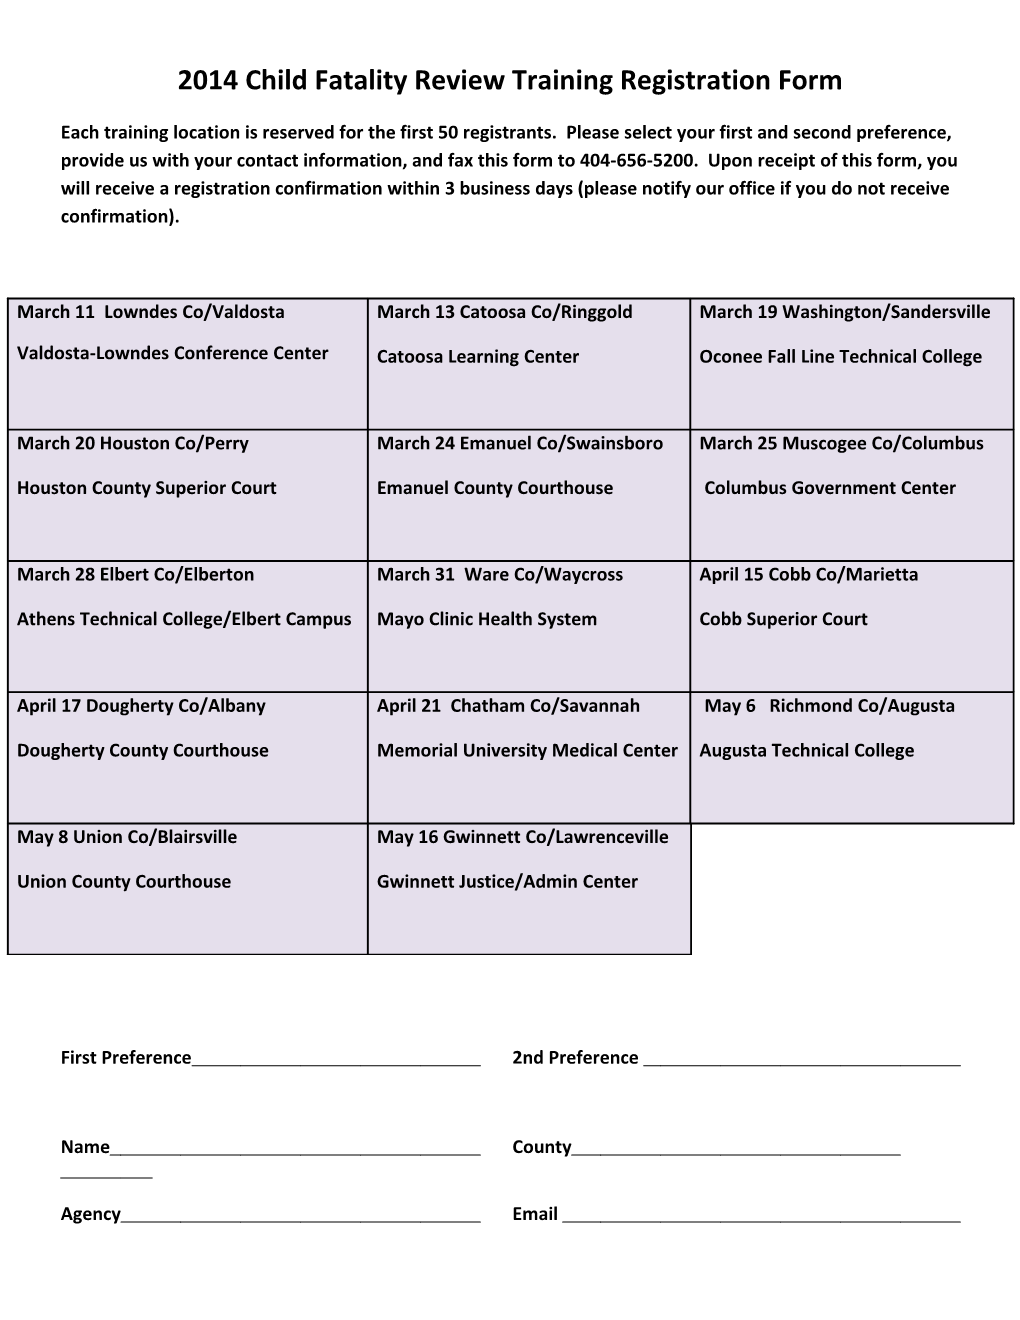 2014 Child Fatality Review Training Registration Form